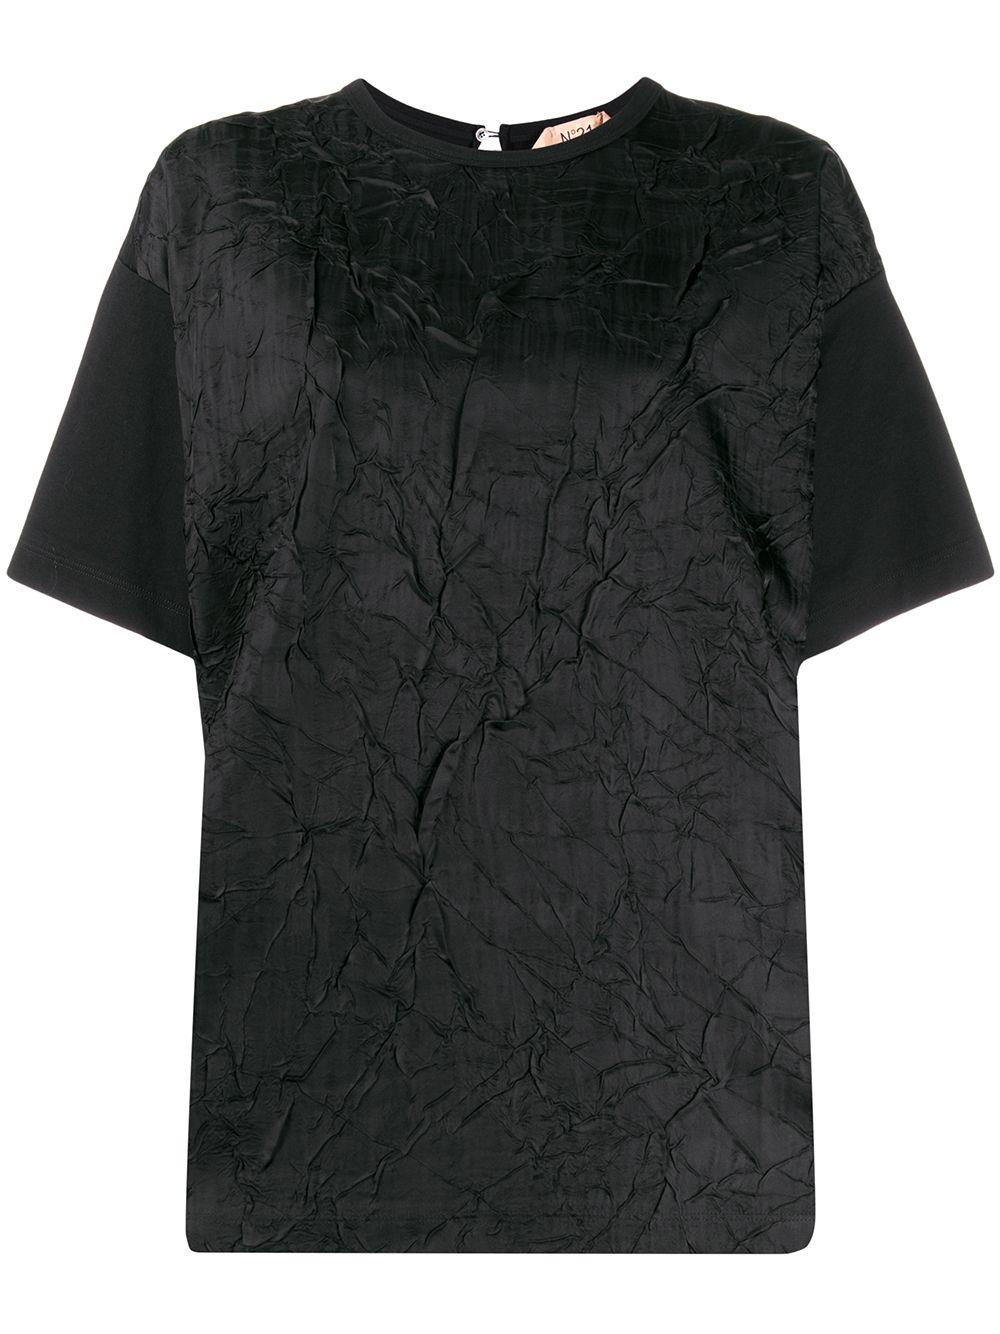 N°21 Cotton Crinkle Texture T-shirt in Black - Lyst